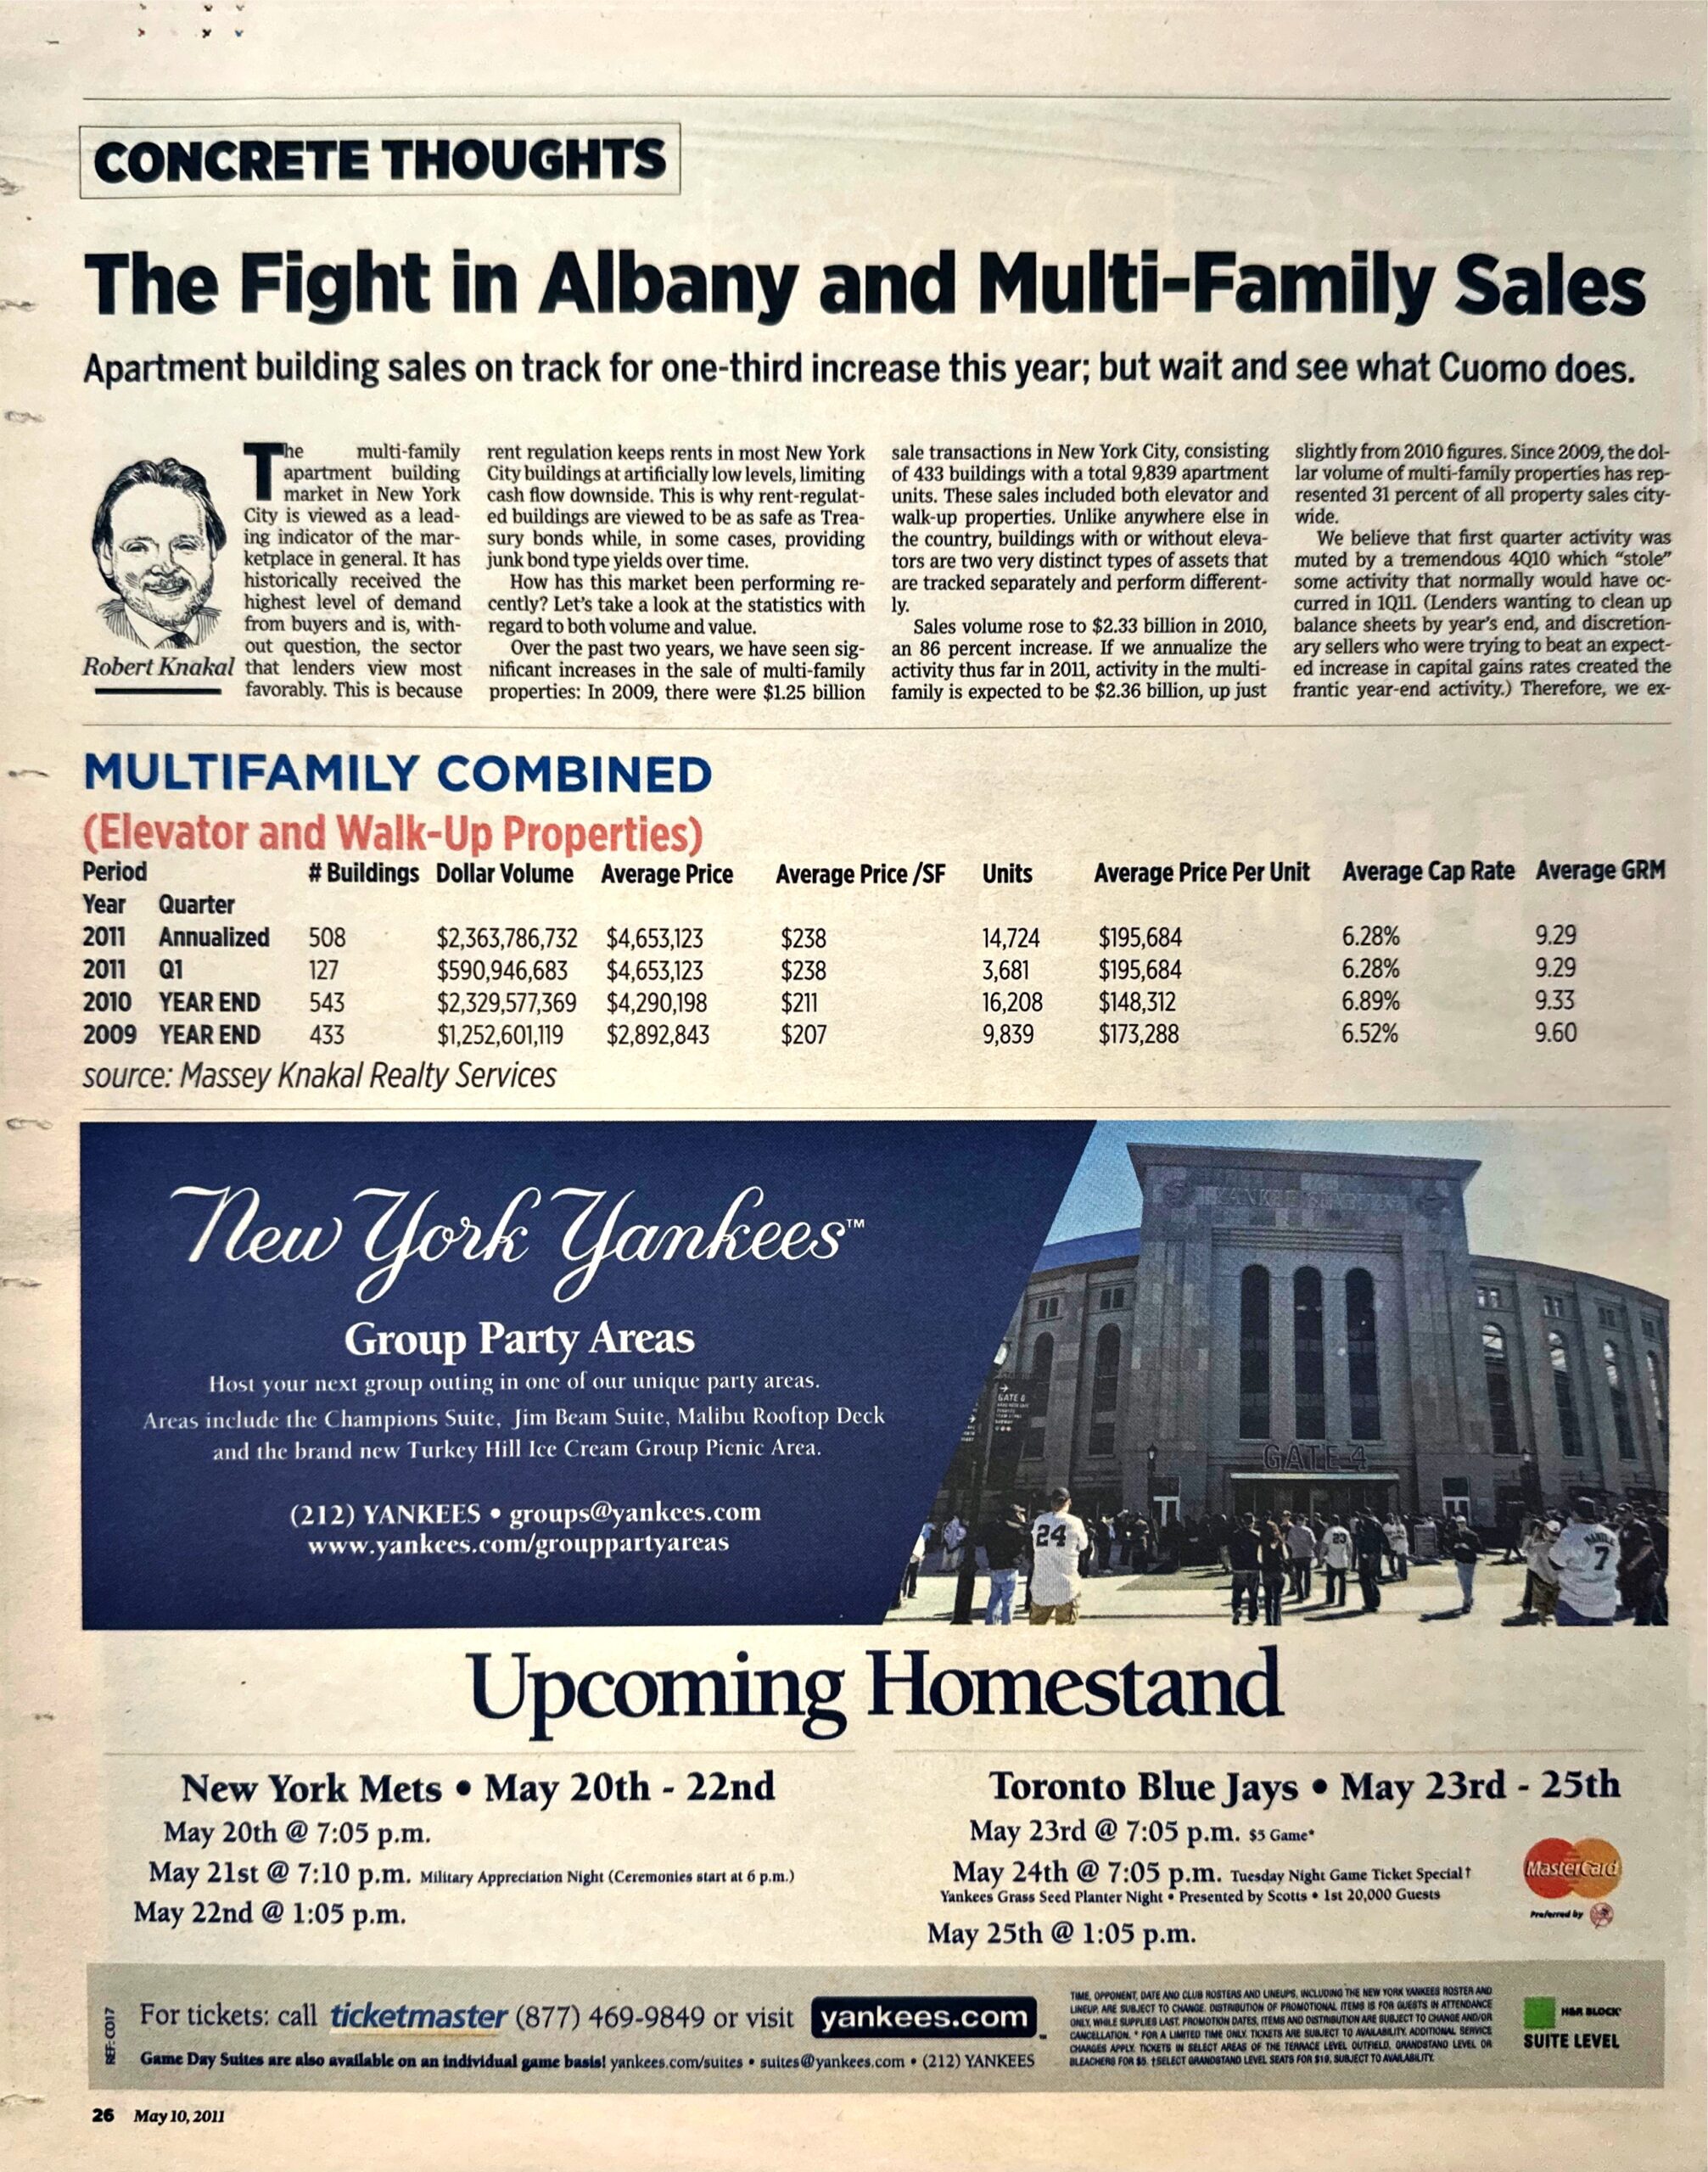 5-10 The Fight in Albany and Multi Family Sales